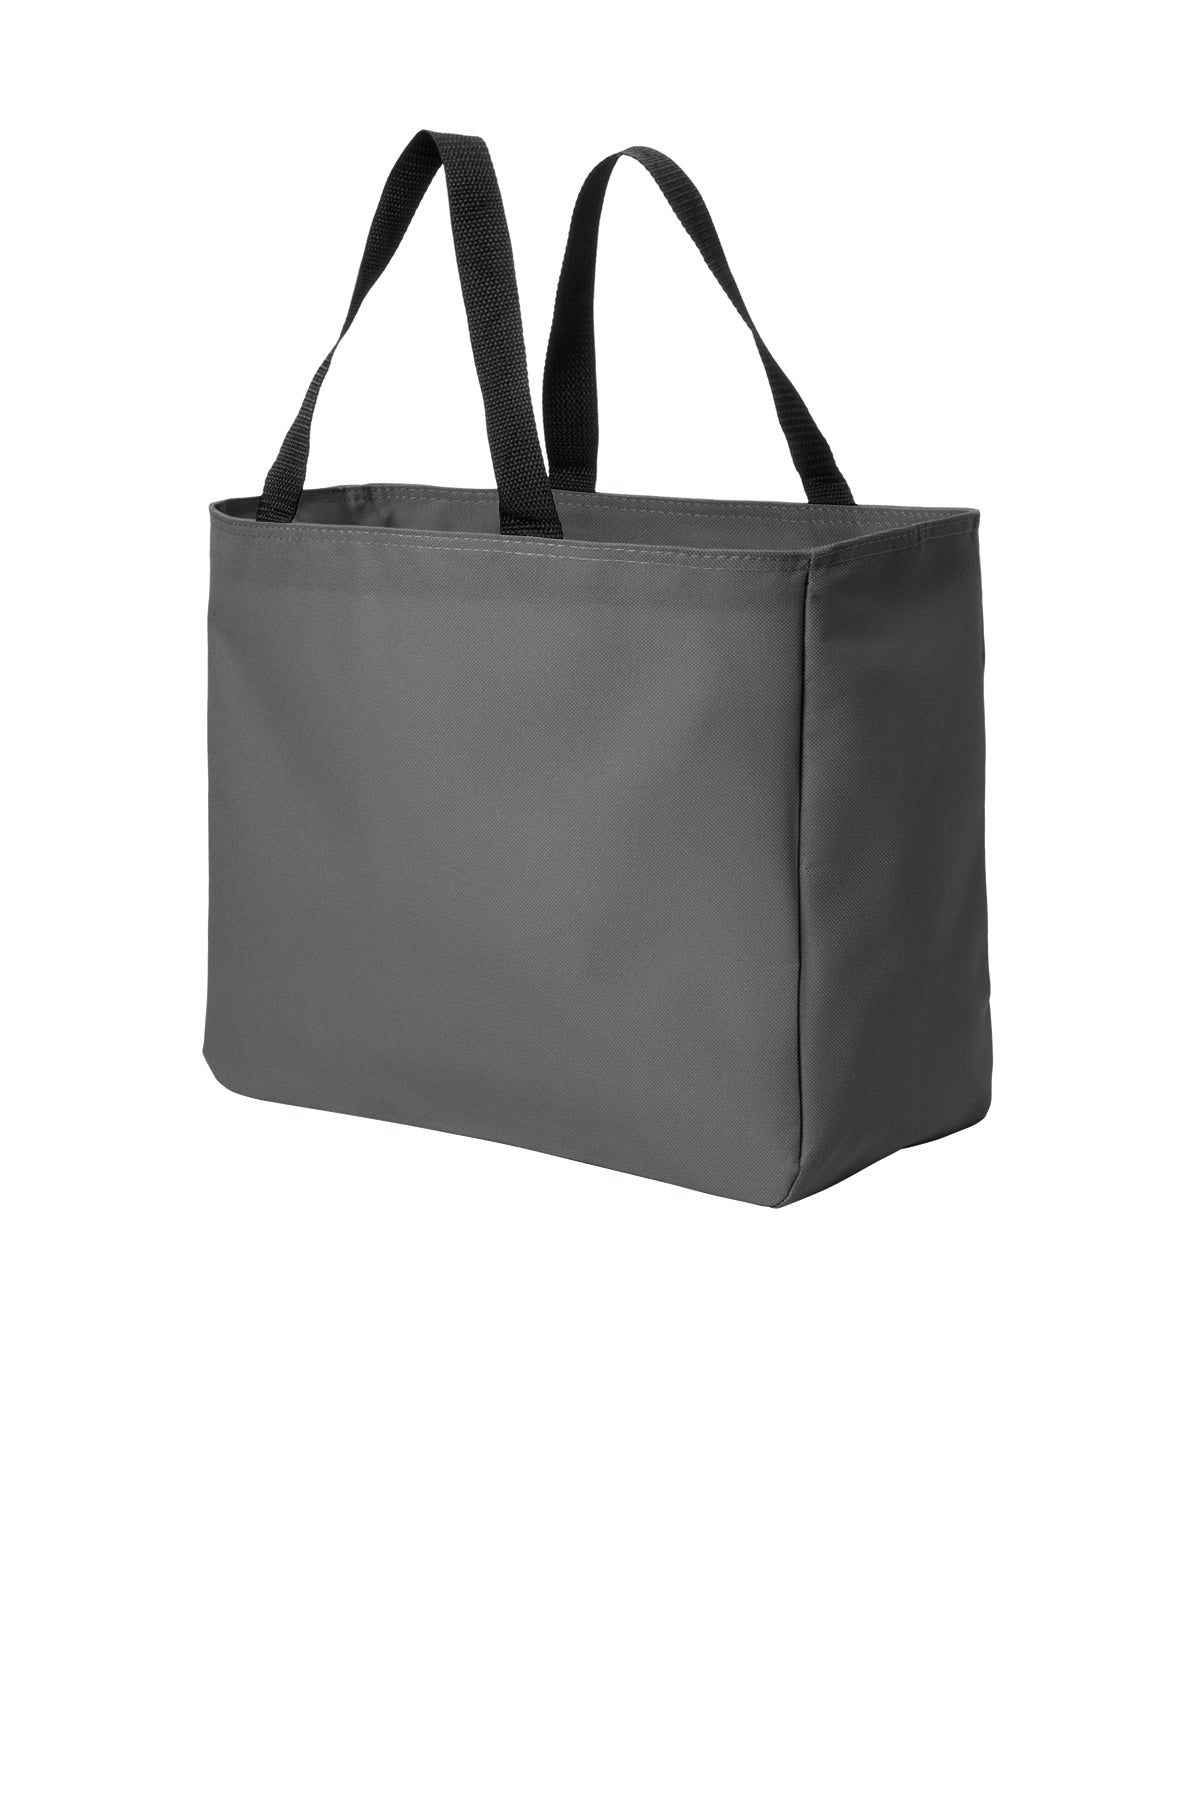 Port Authority - Essential Customized Tote, Charcoal